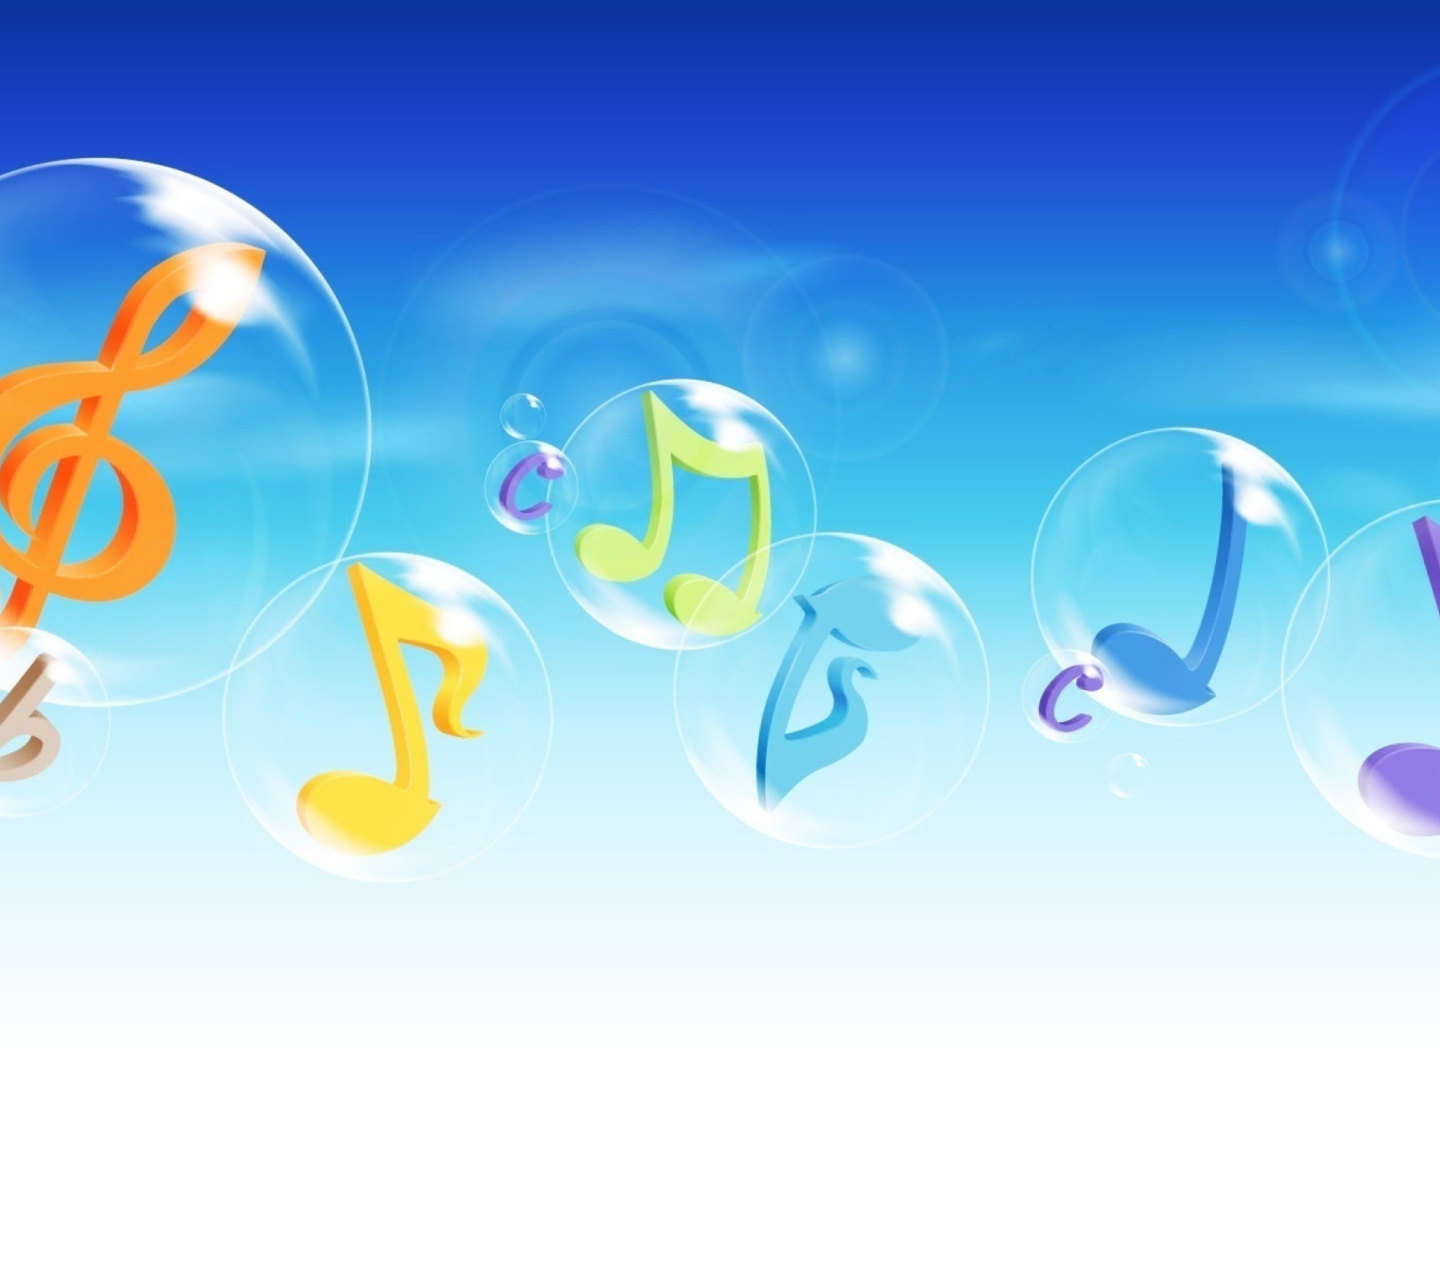 Musical Notes In Bubbles wallpaper 1440x1280